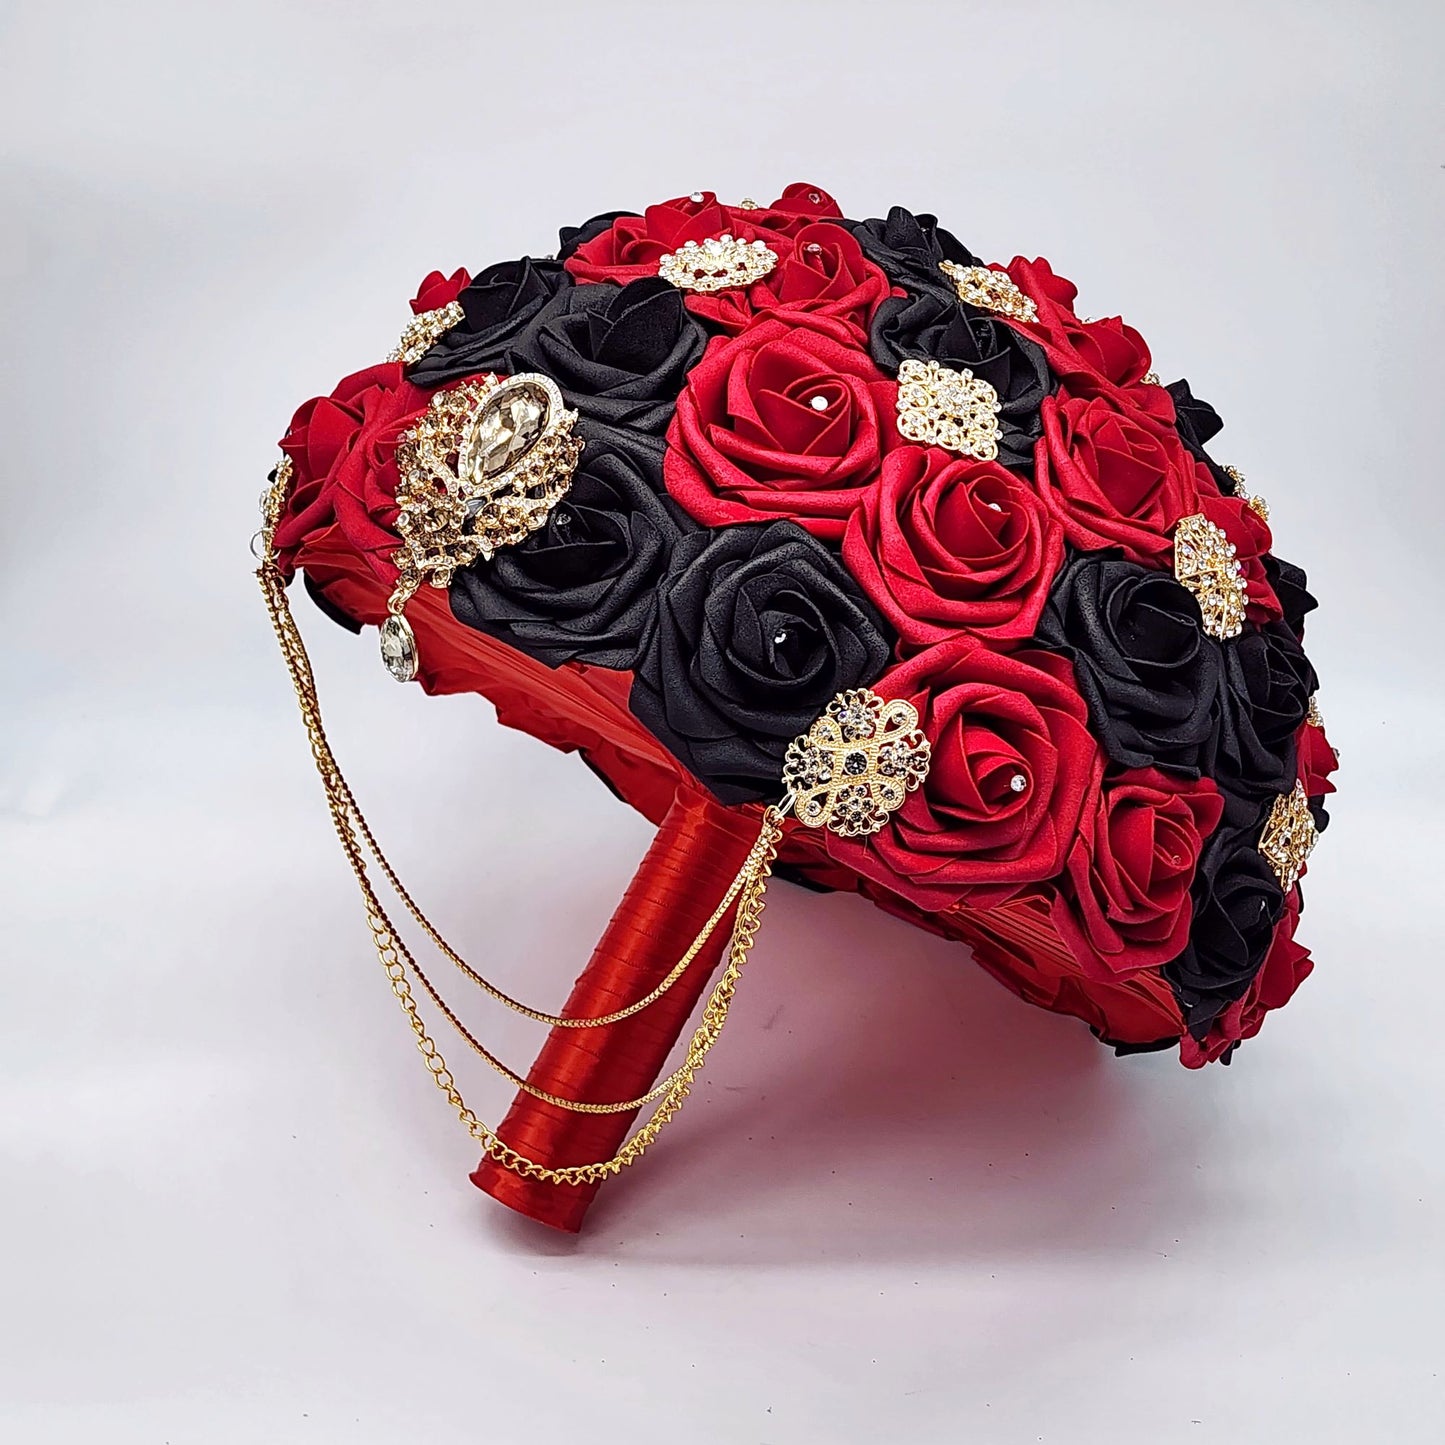 Red and Black Bridal Bouquet With Cascading Gold Chains and Brooches